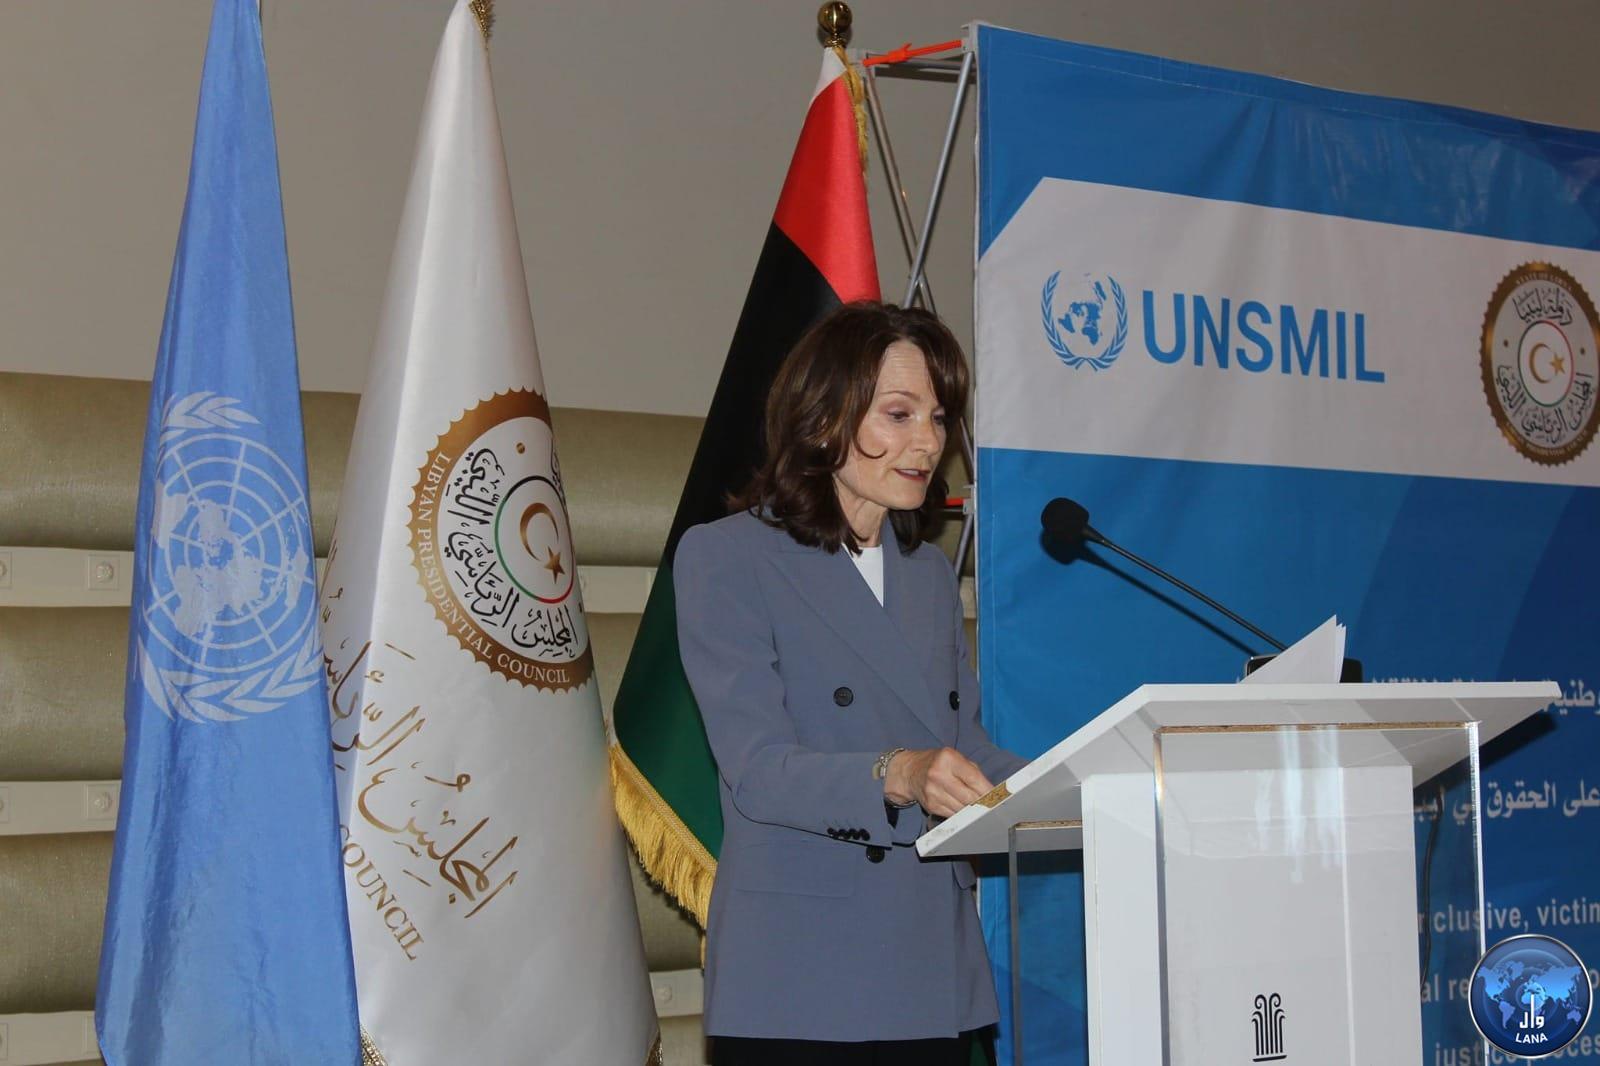 Gagnon: The United Nations is committed to reaching consensus between the Libyan political parties.